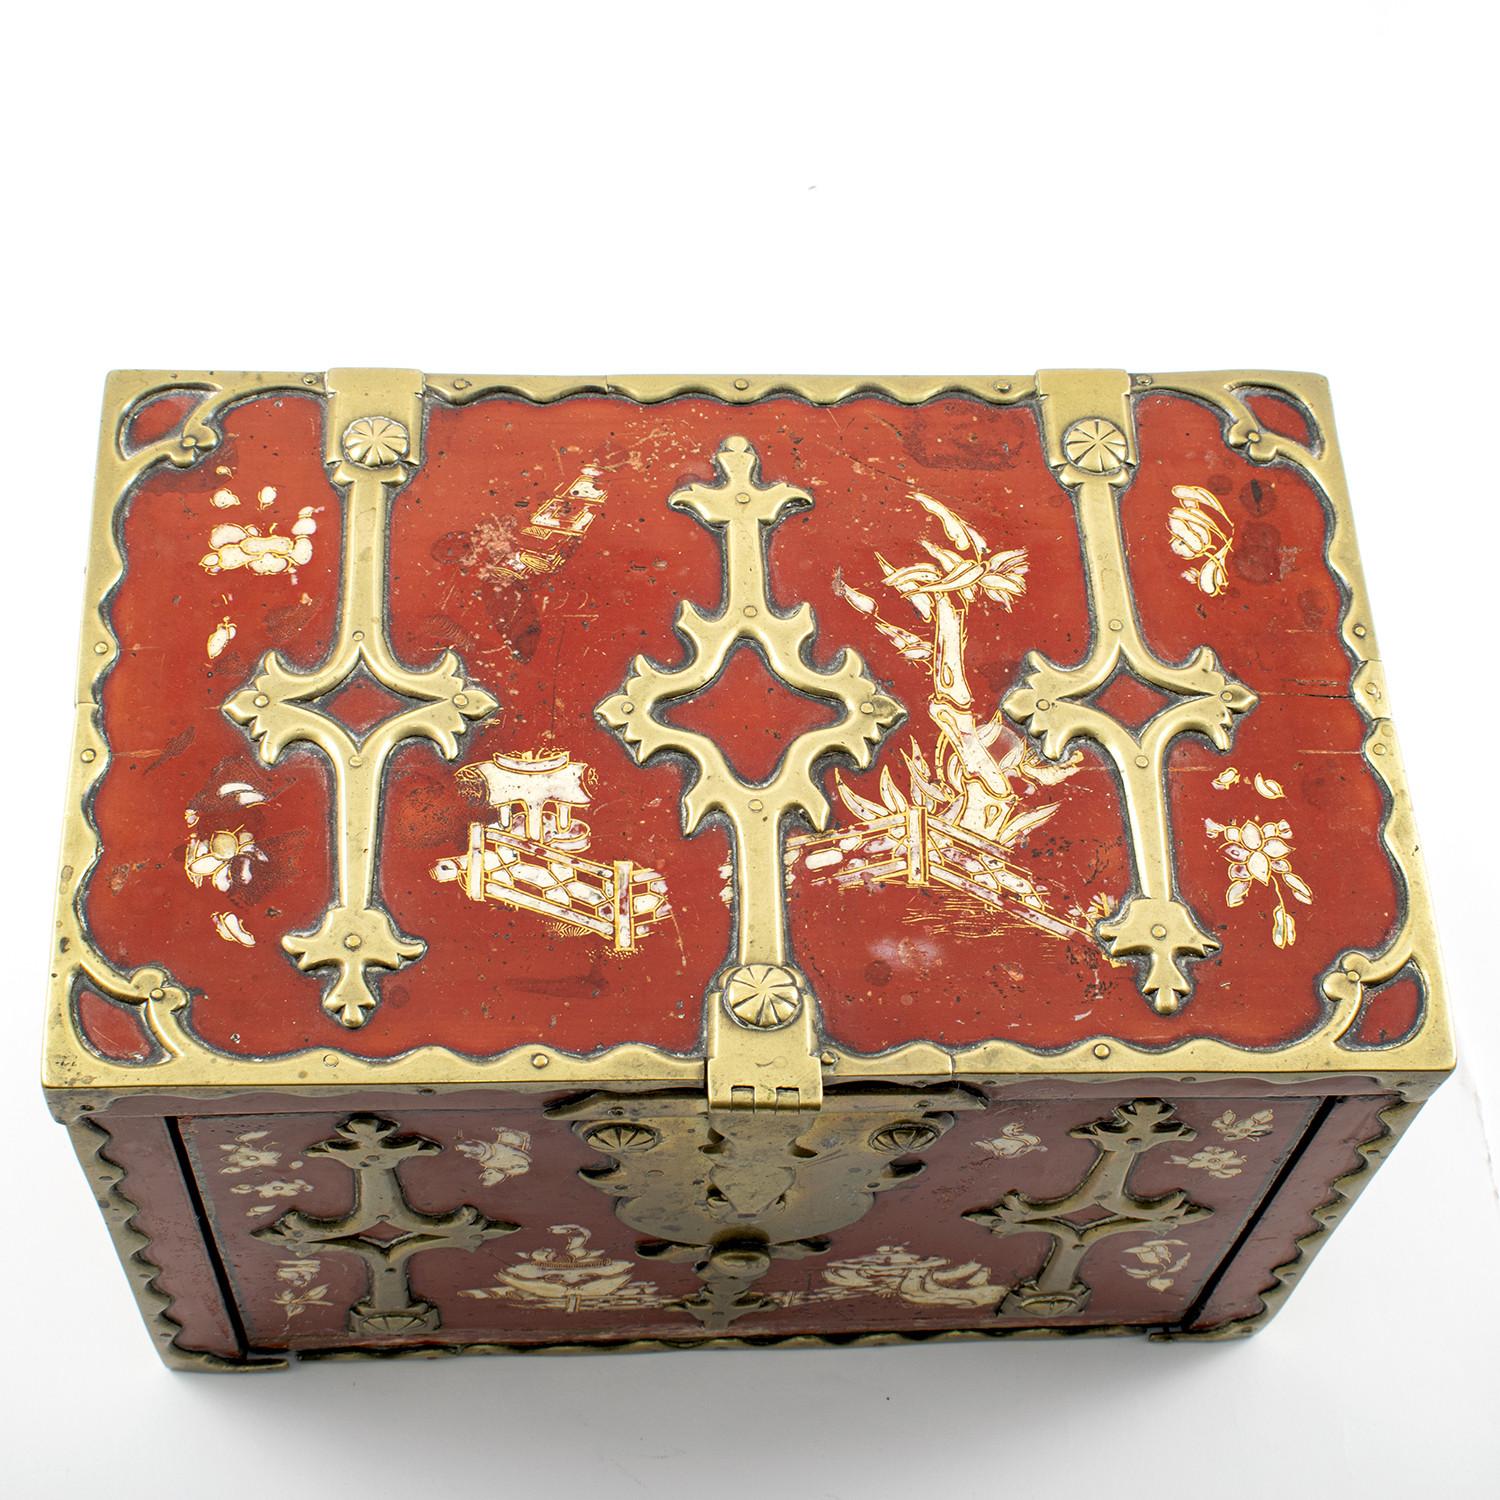 Padouk Early 18th Century Dutch Baroque Box For Sale